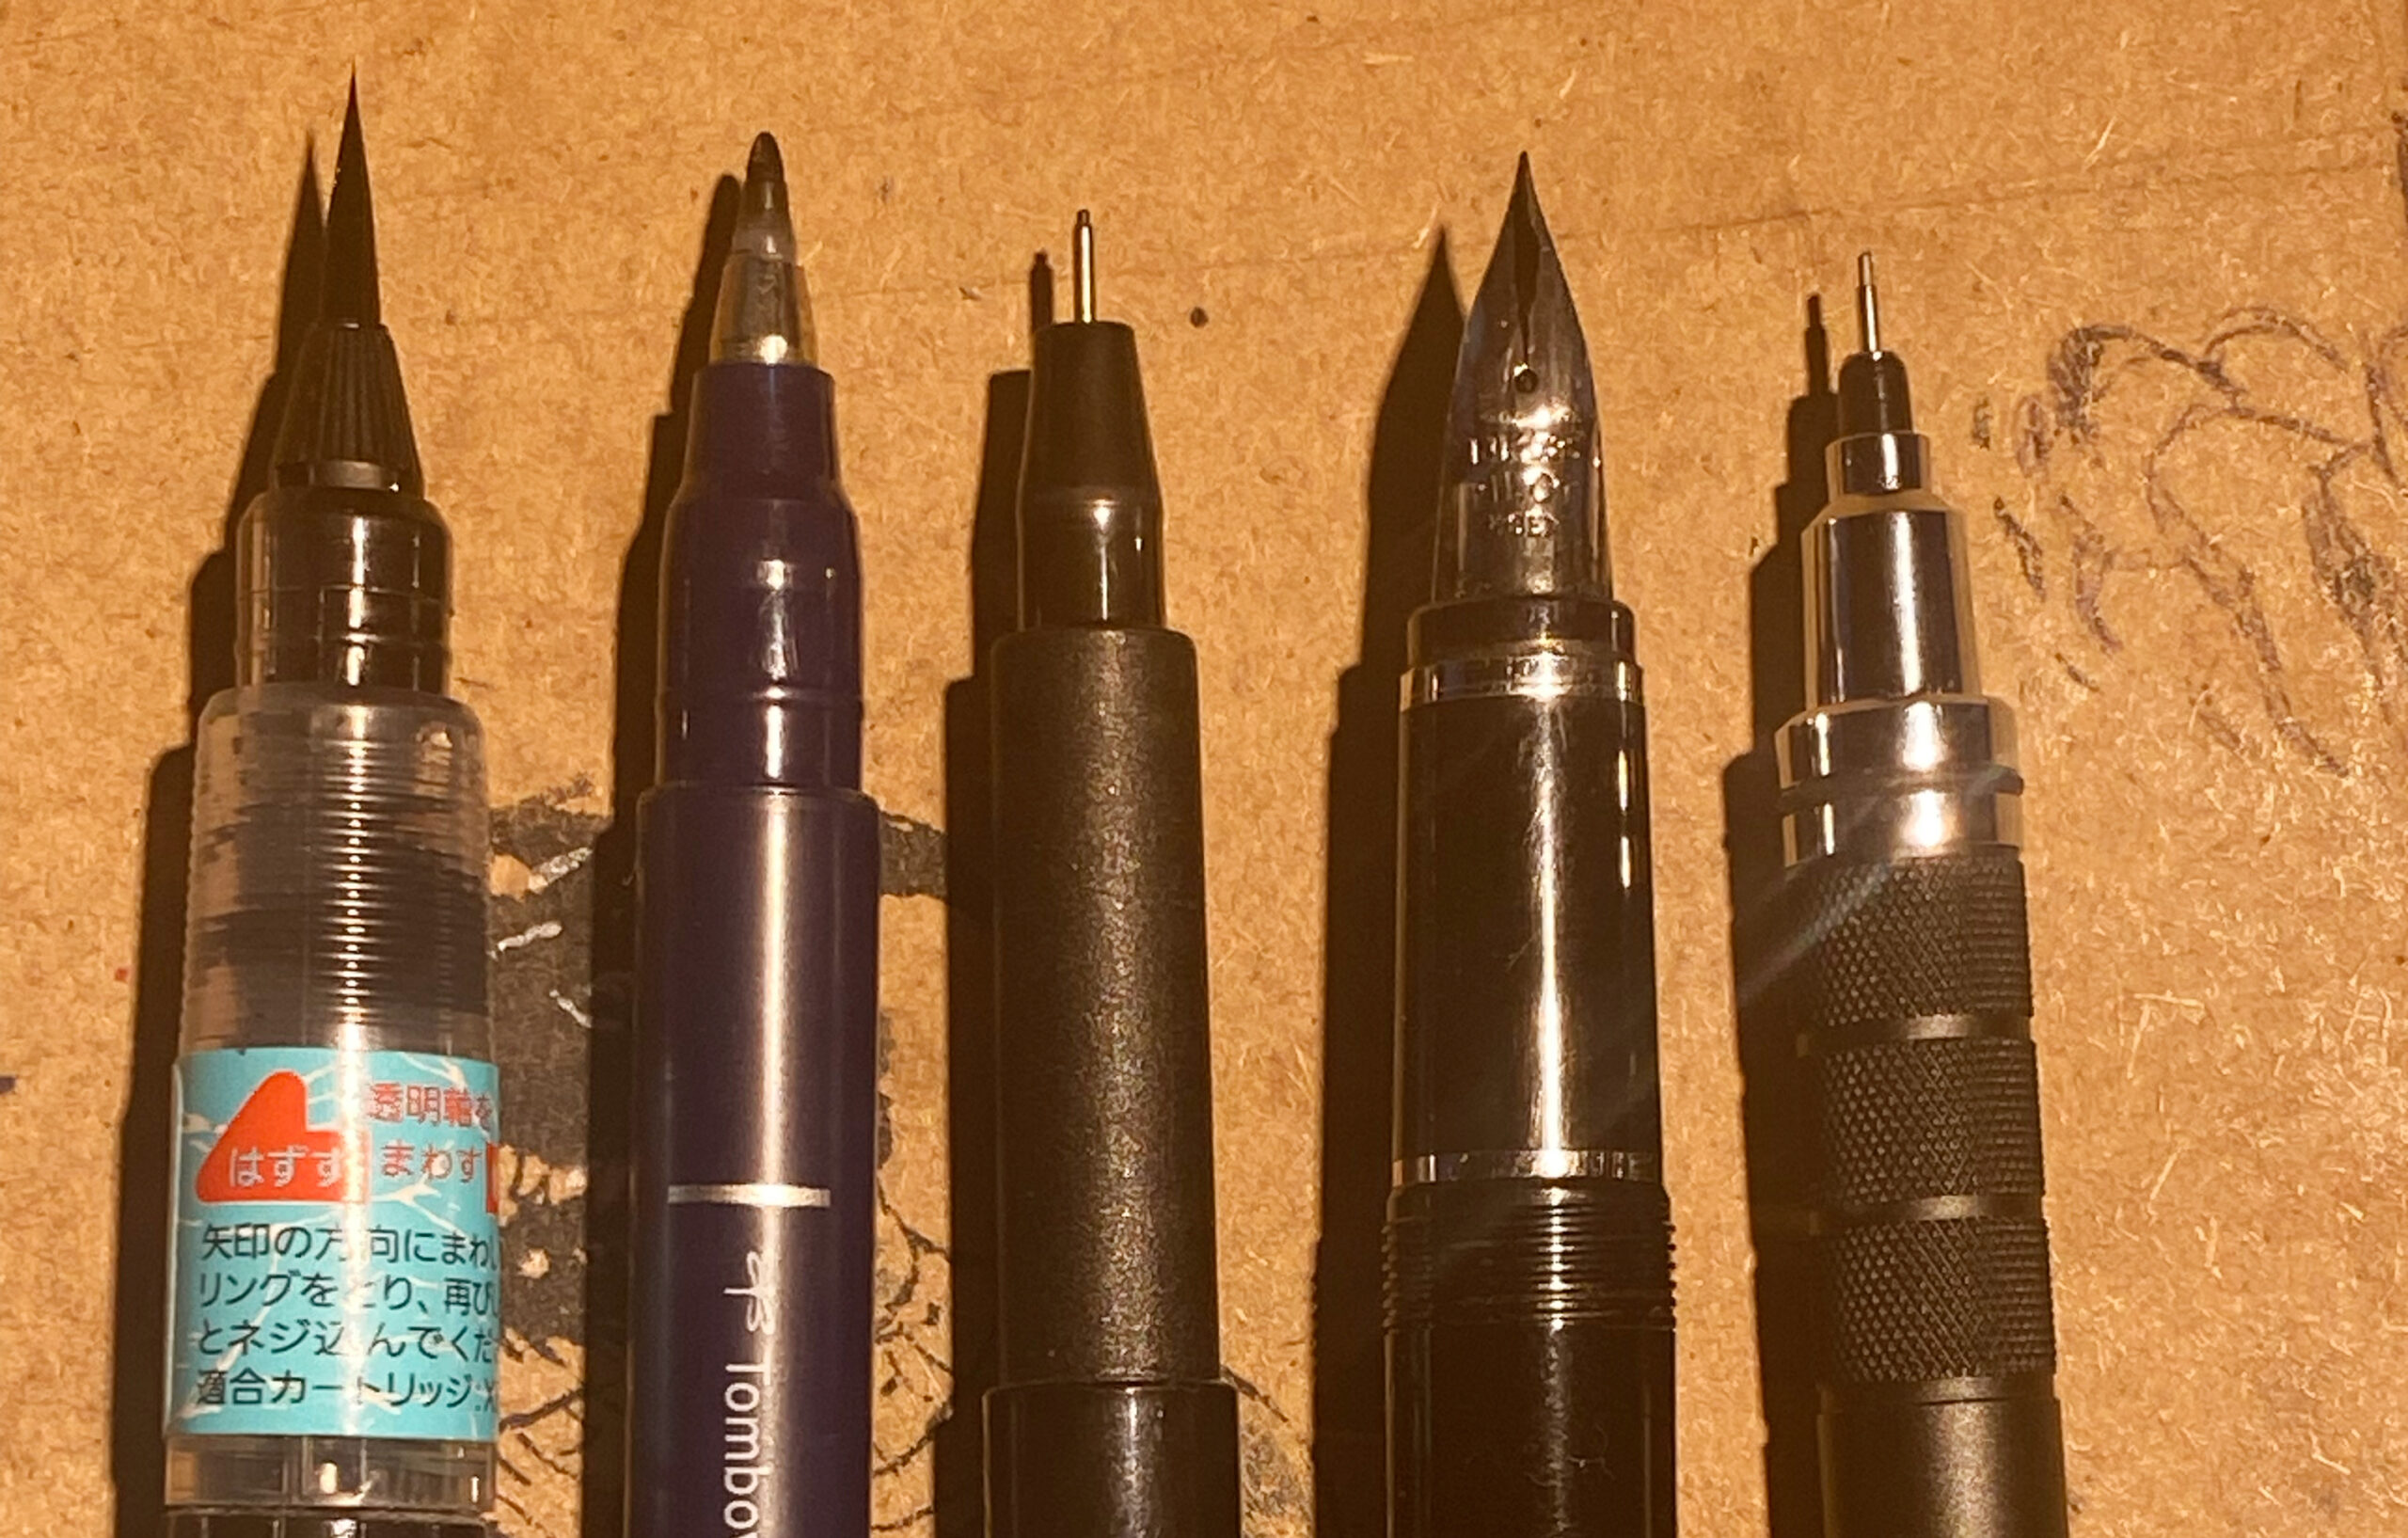 my current drawing tools of choice